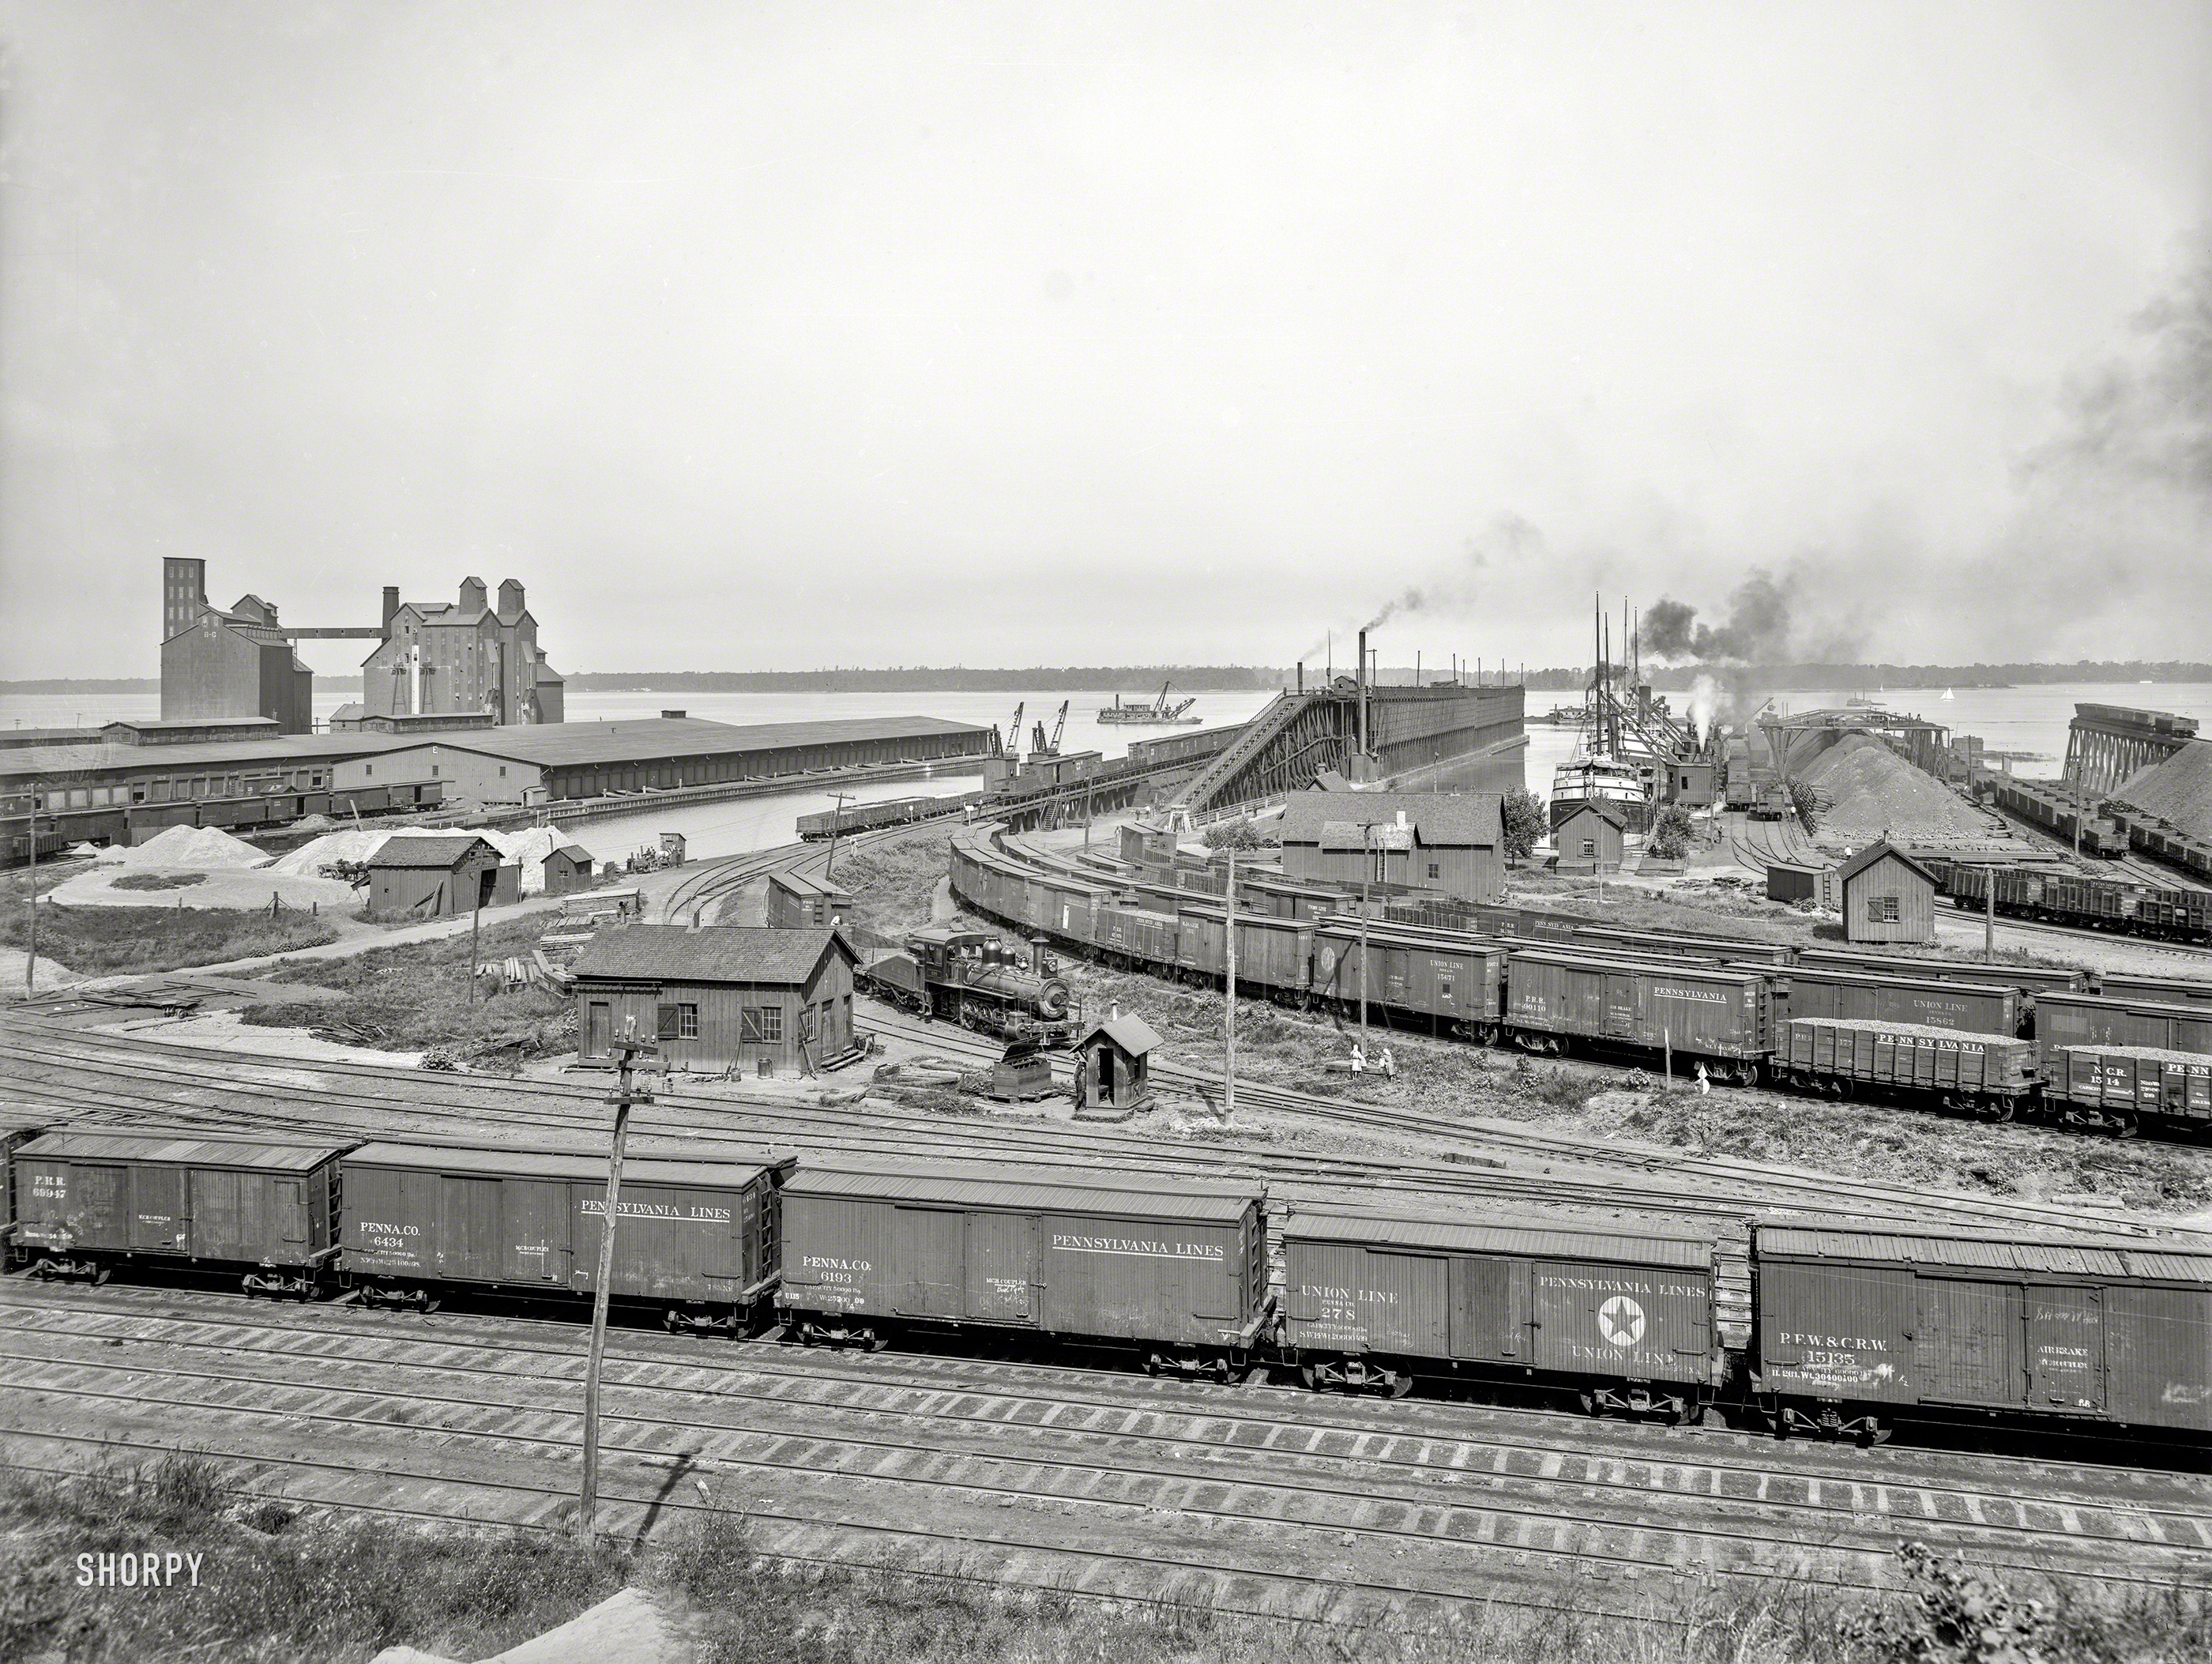 Circa 1900. "Anchor Line docks and Penna. R.R. coal & ore docks, Erie, Pennsylvania." Also represented: Cars of the Pittsburgh, Fort Wayne & Chicago Railway. 8x10 inch glass negative, Detroit Publishing Co. View full size.